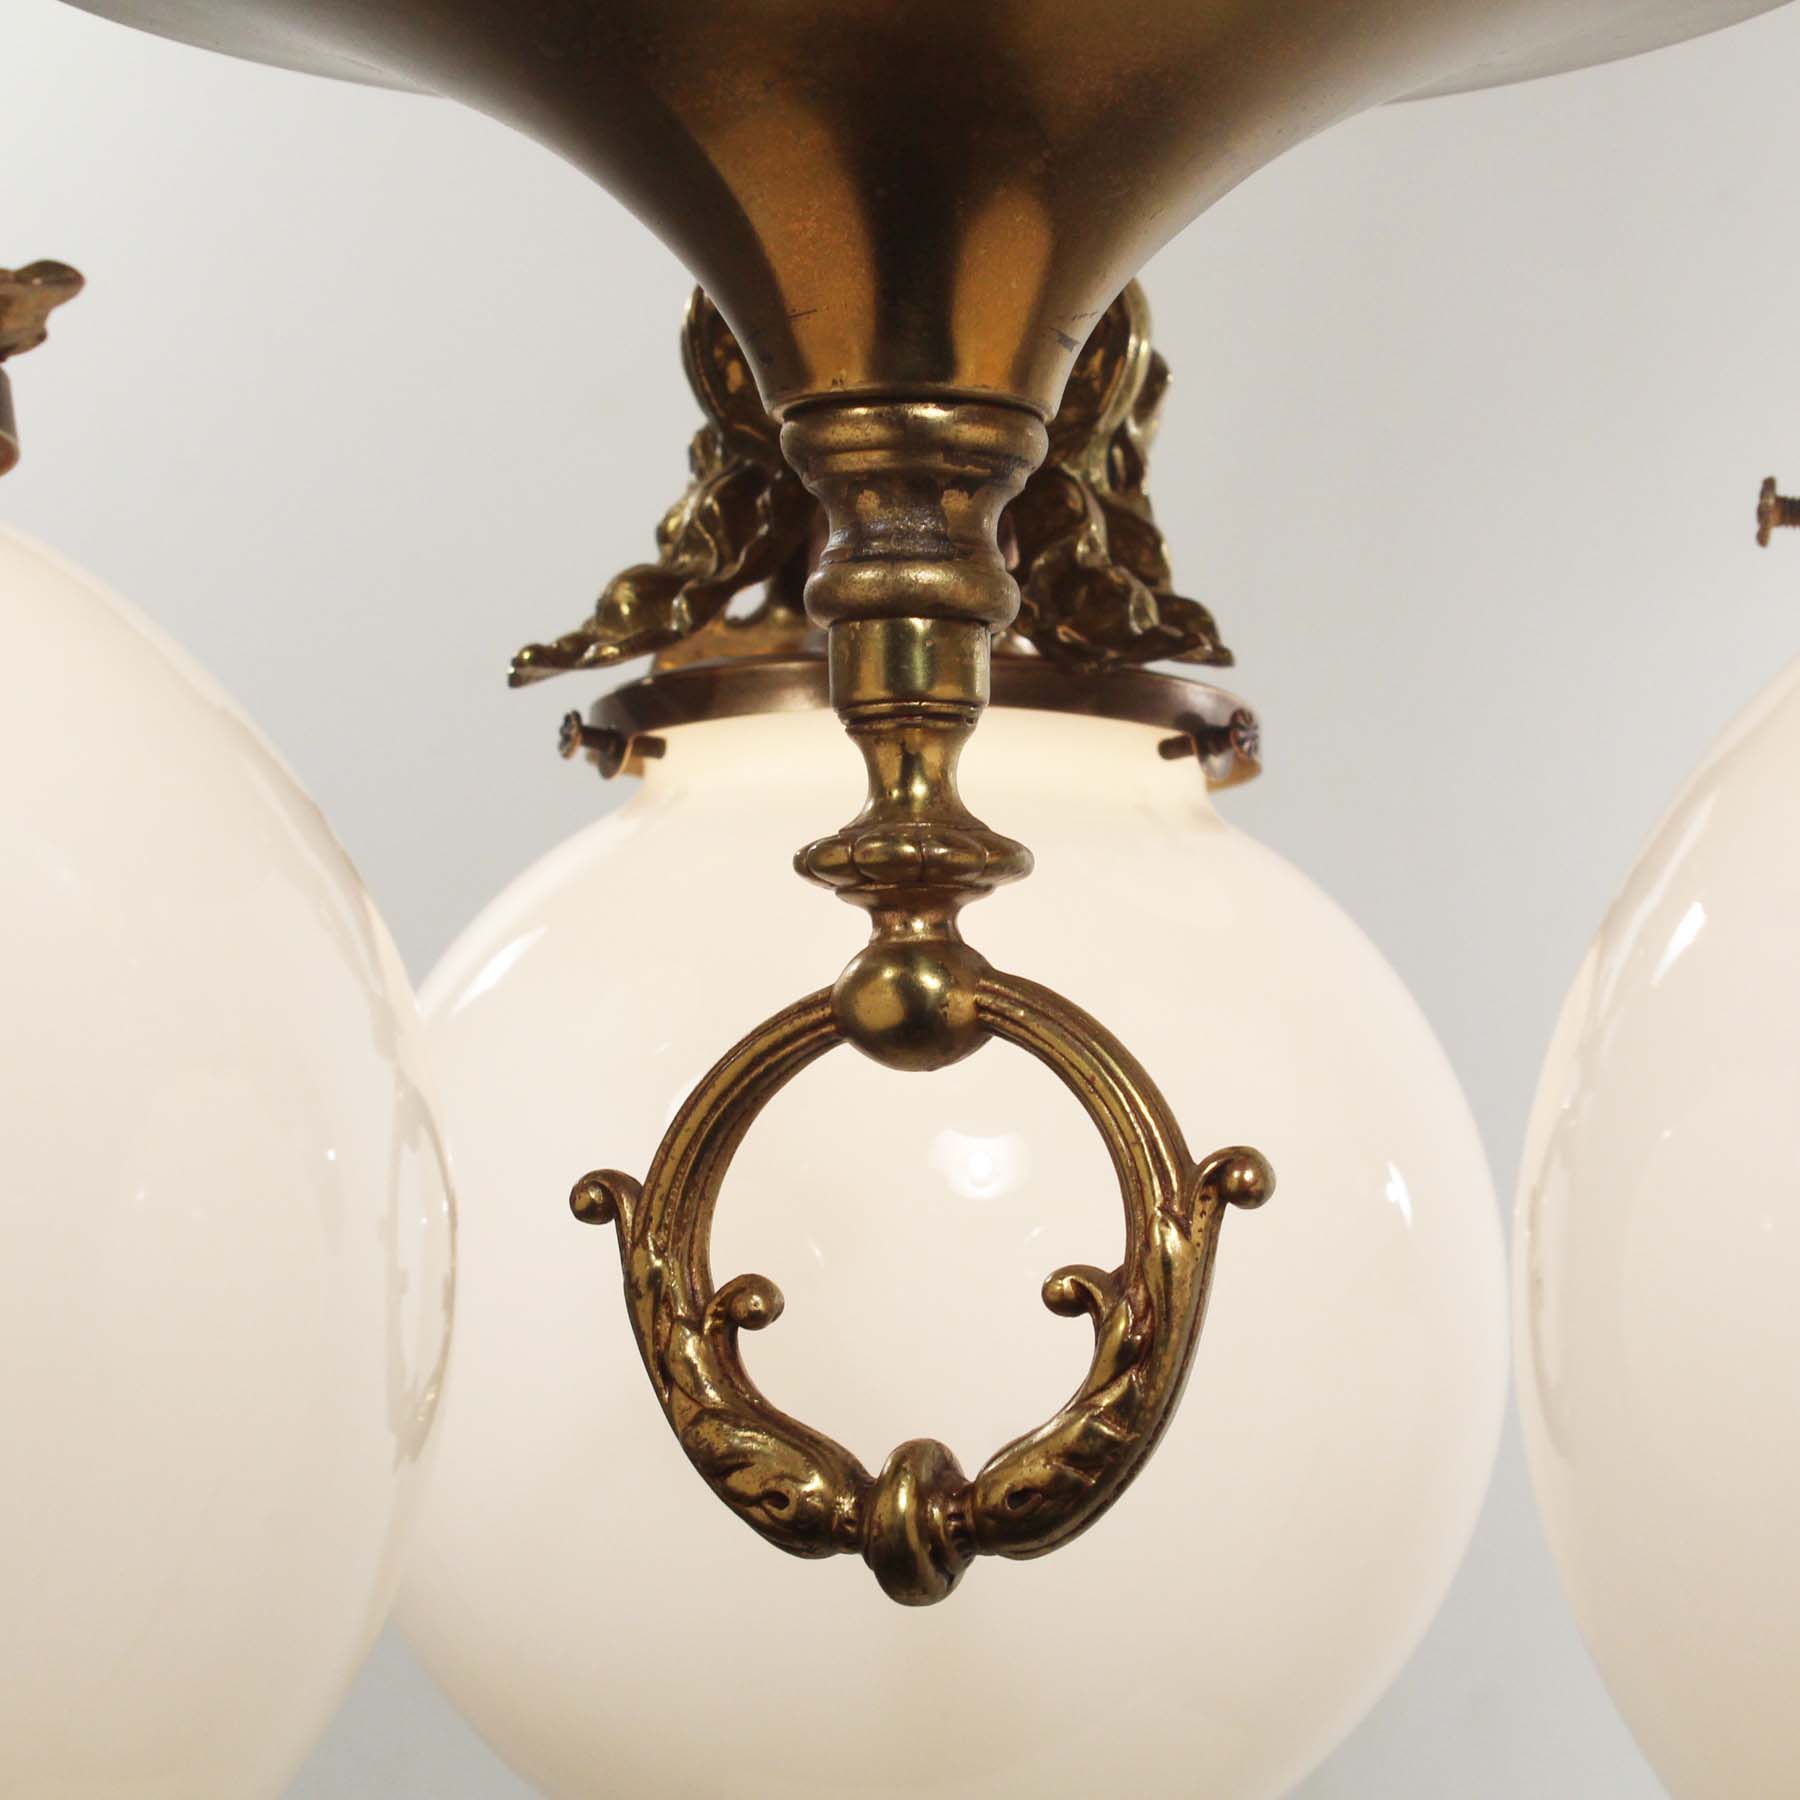 SOLD Substantial Antique Brass Chandelier with Ball Shades-67605